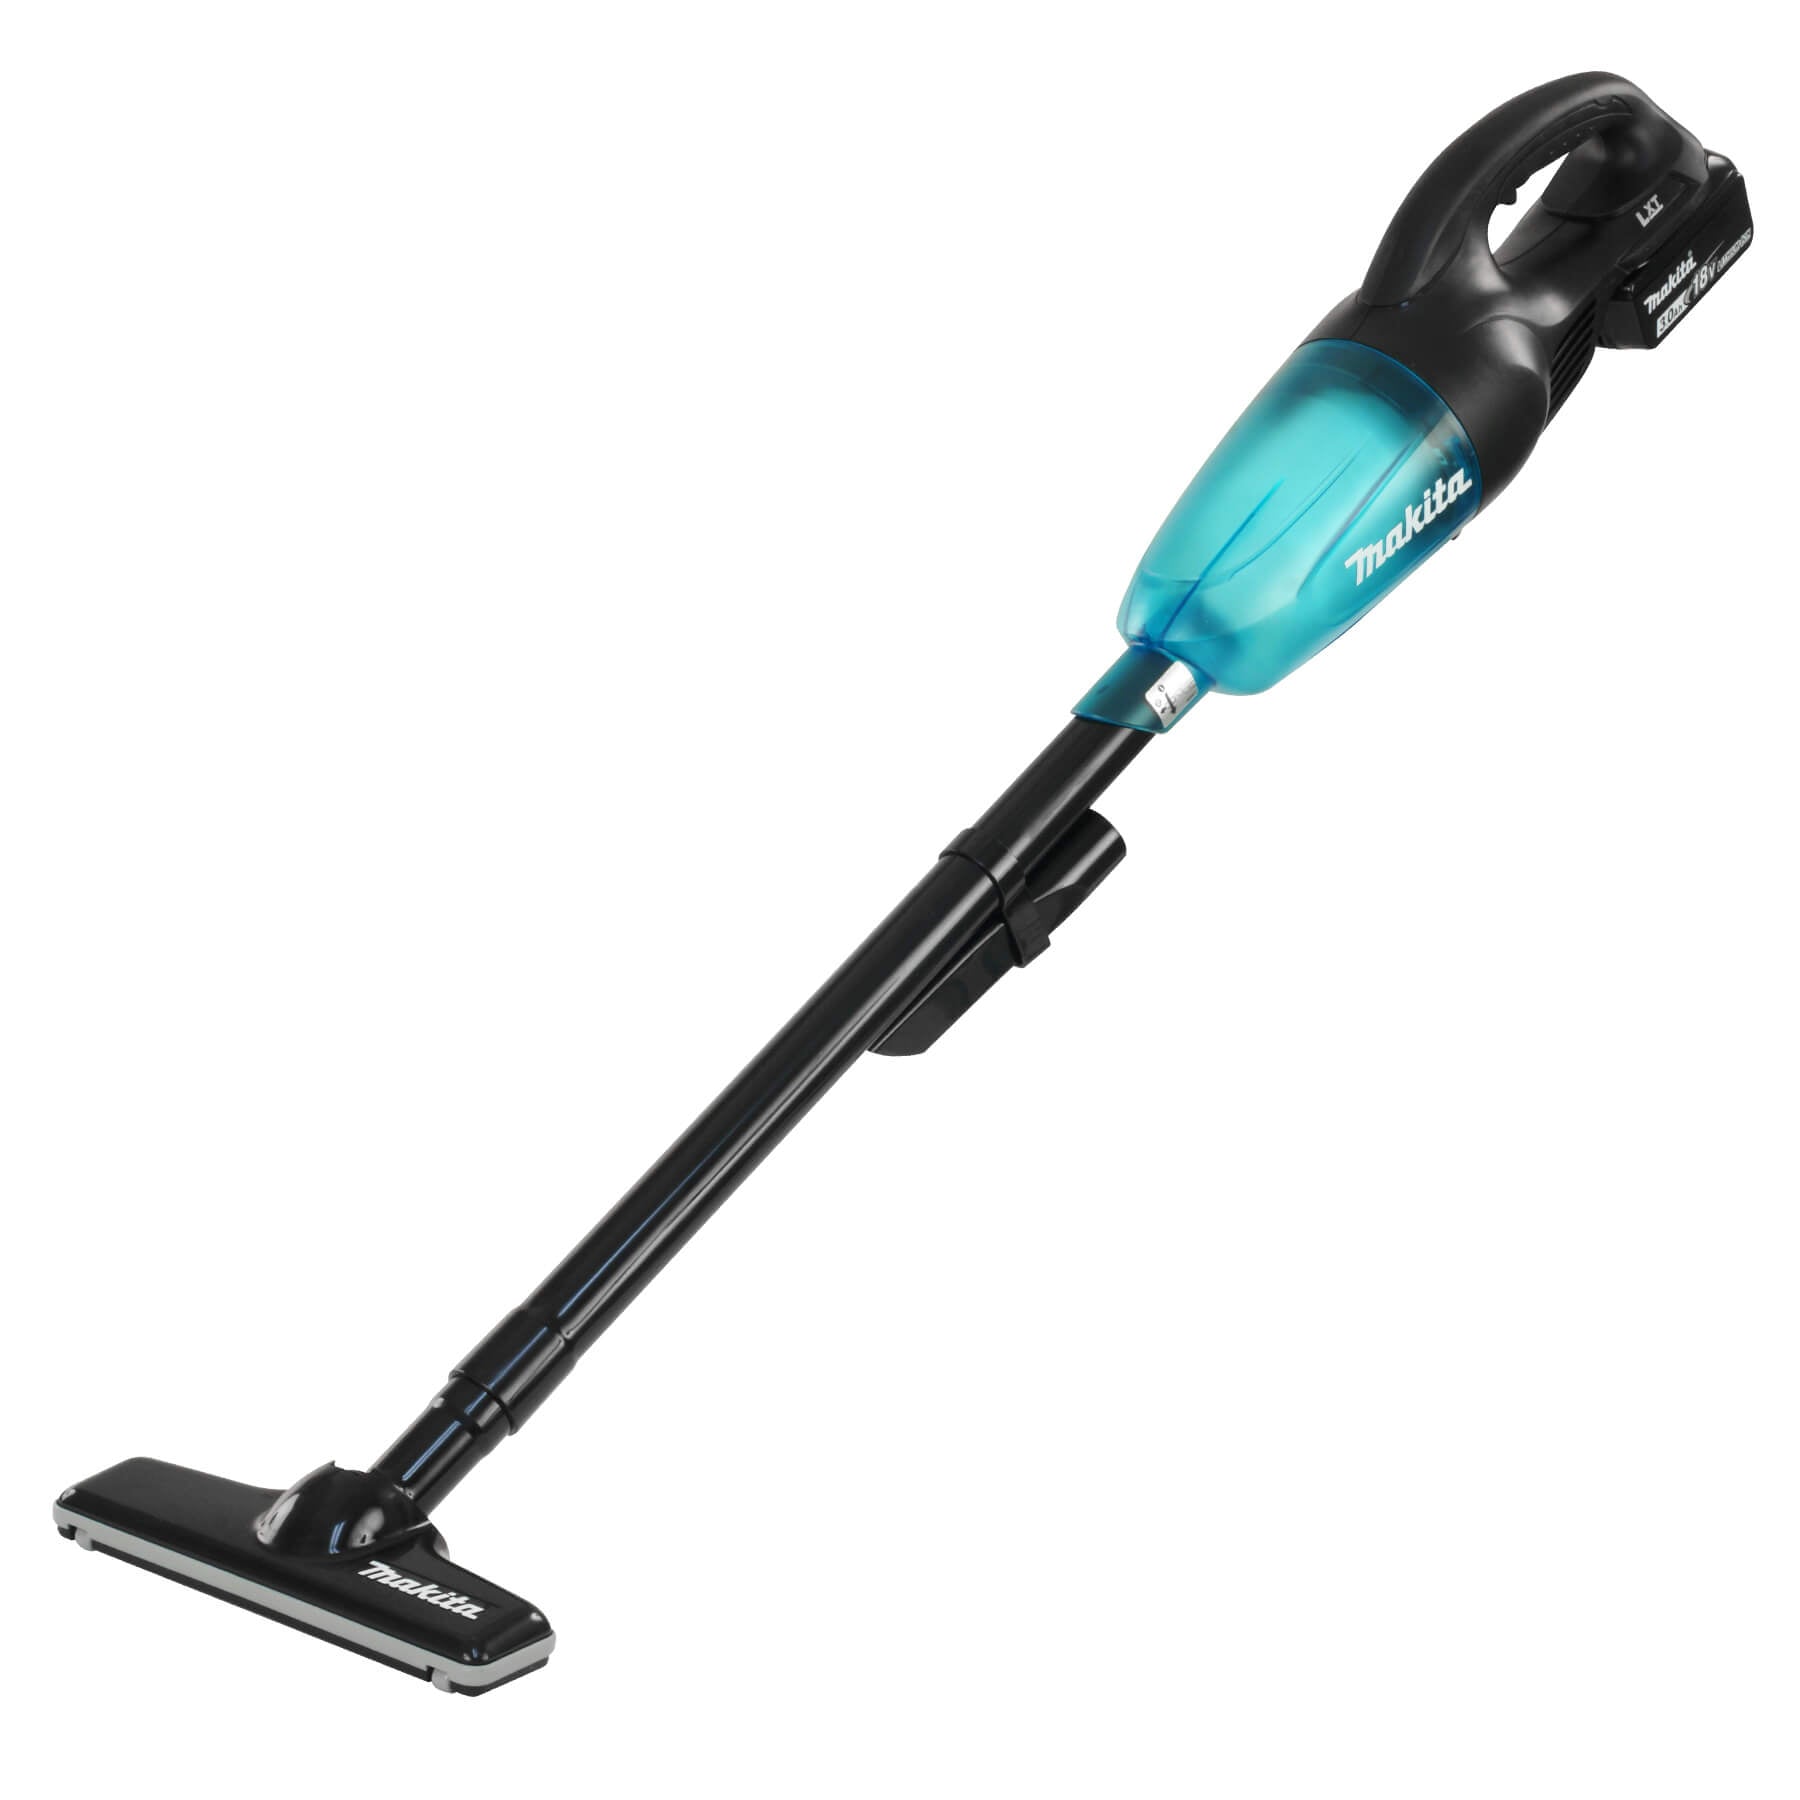 Makita DCL180RFB 18V LXT Vacuum Cleaner 3.0Ah - wise-line-tools